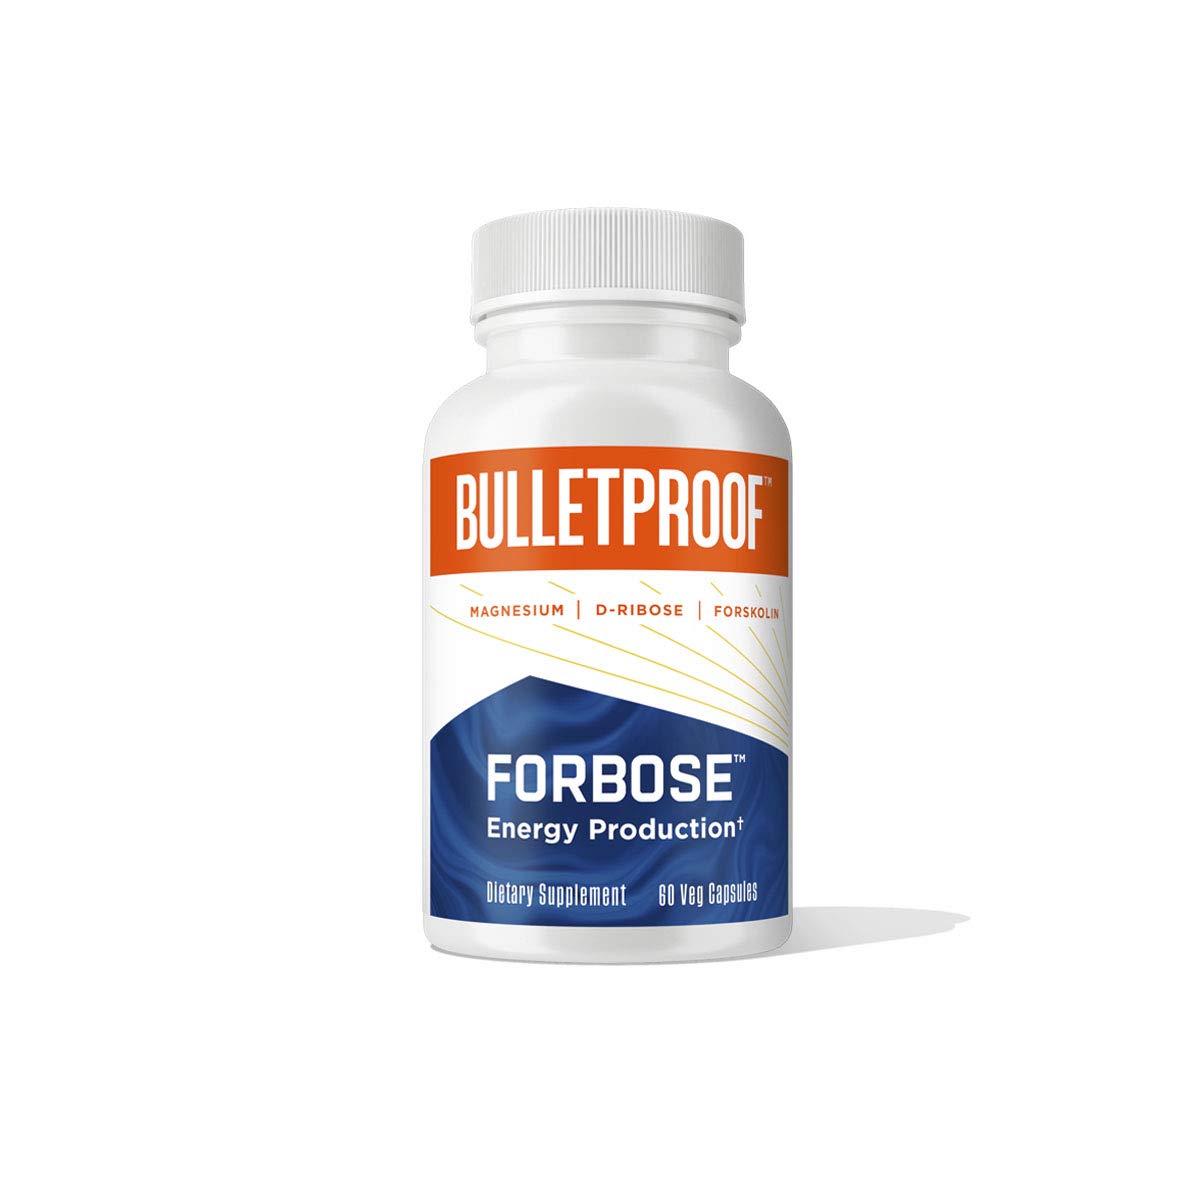 Bulletproof Forbose Energy Production Capsules, 60 Count, Supplement for Energy, Performance and Recovery